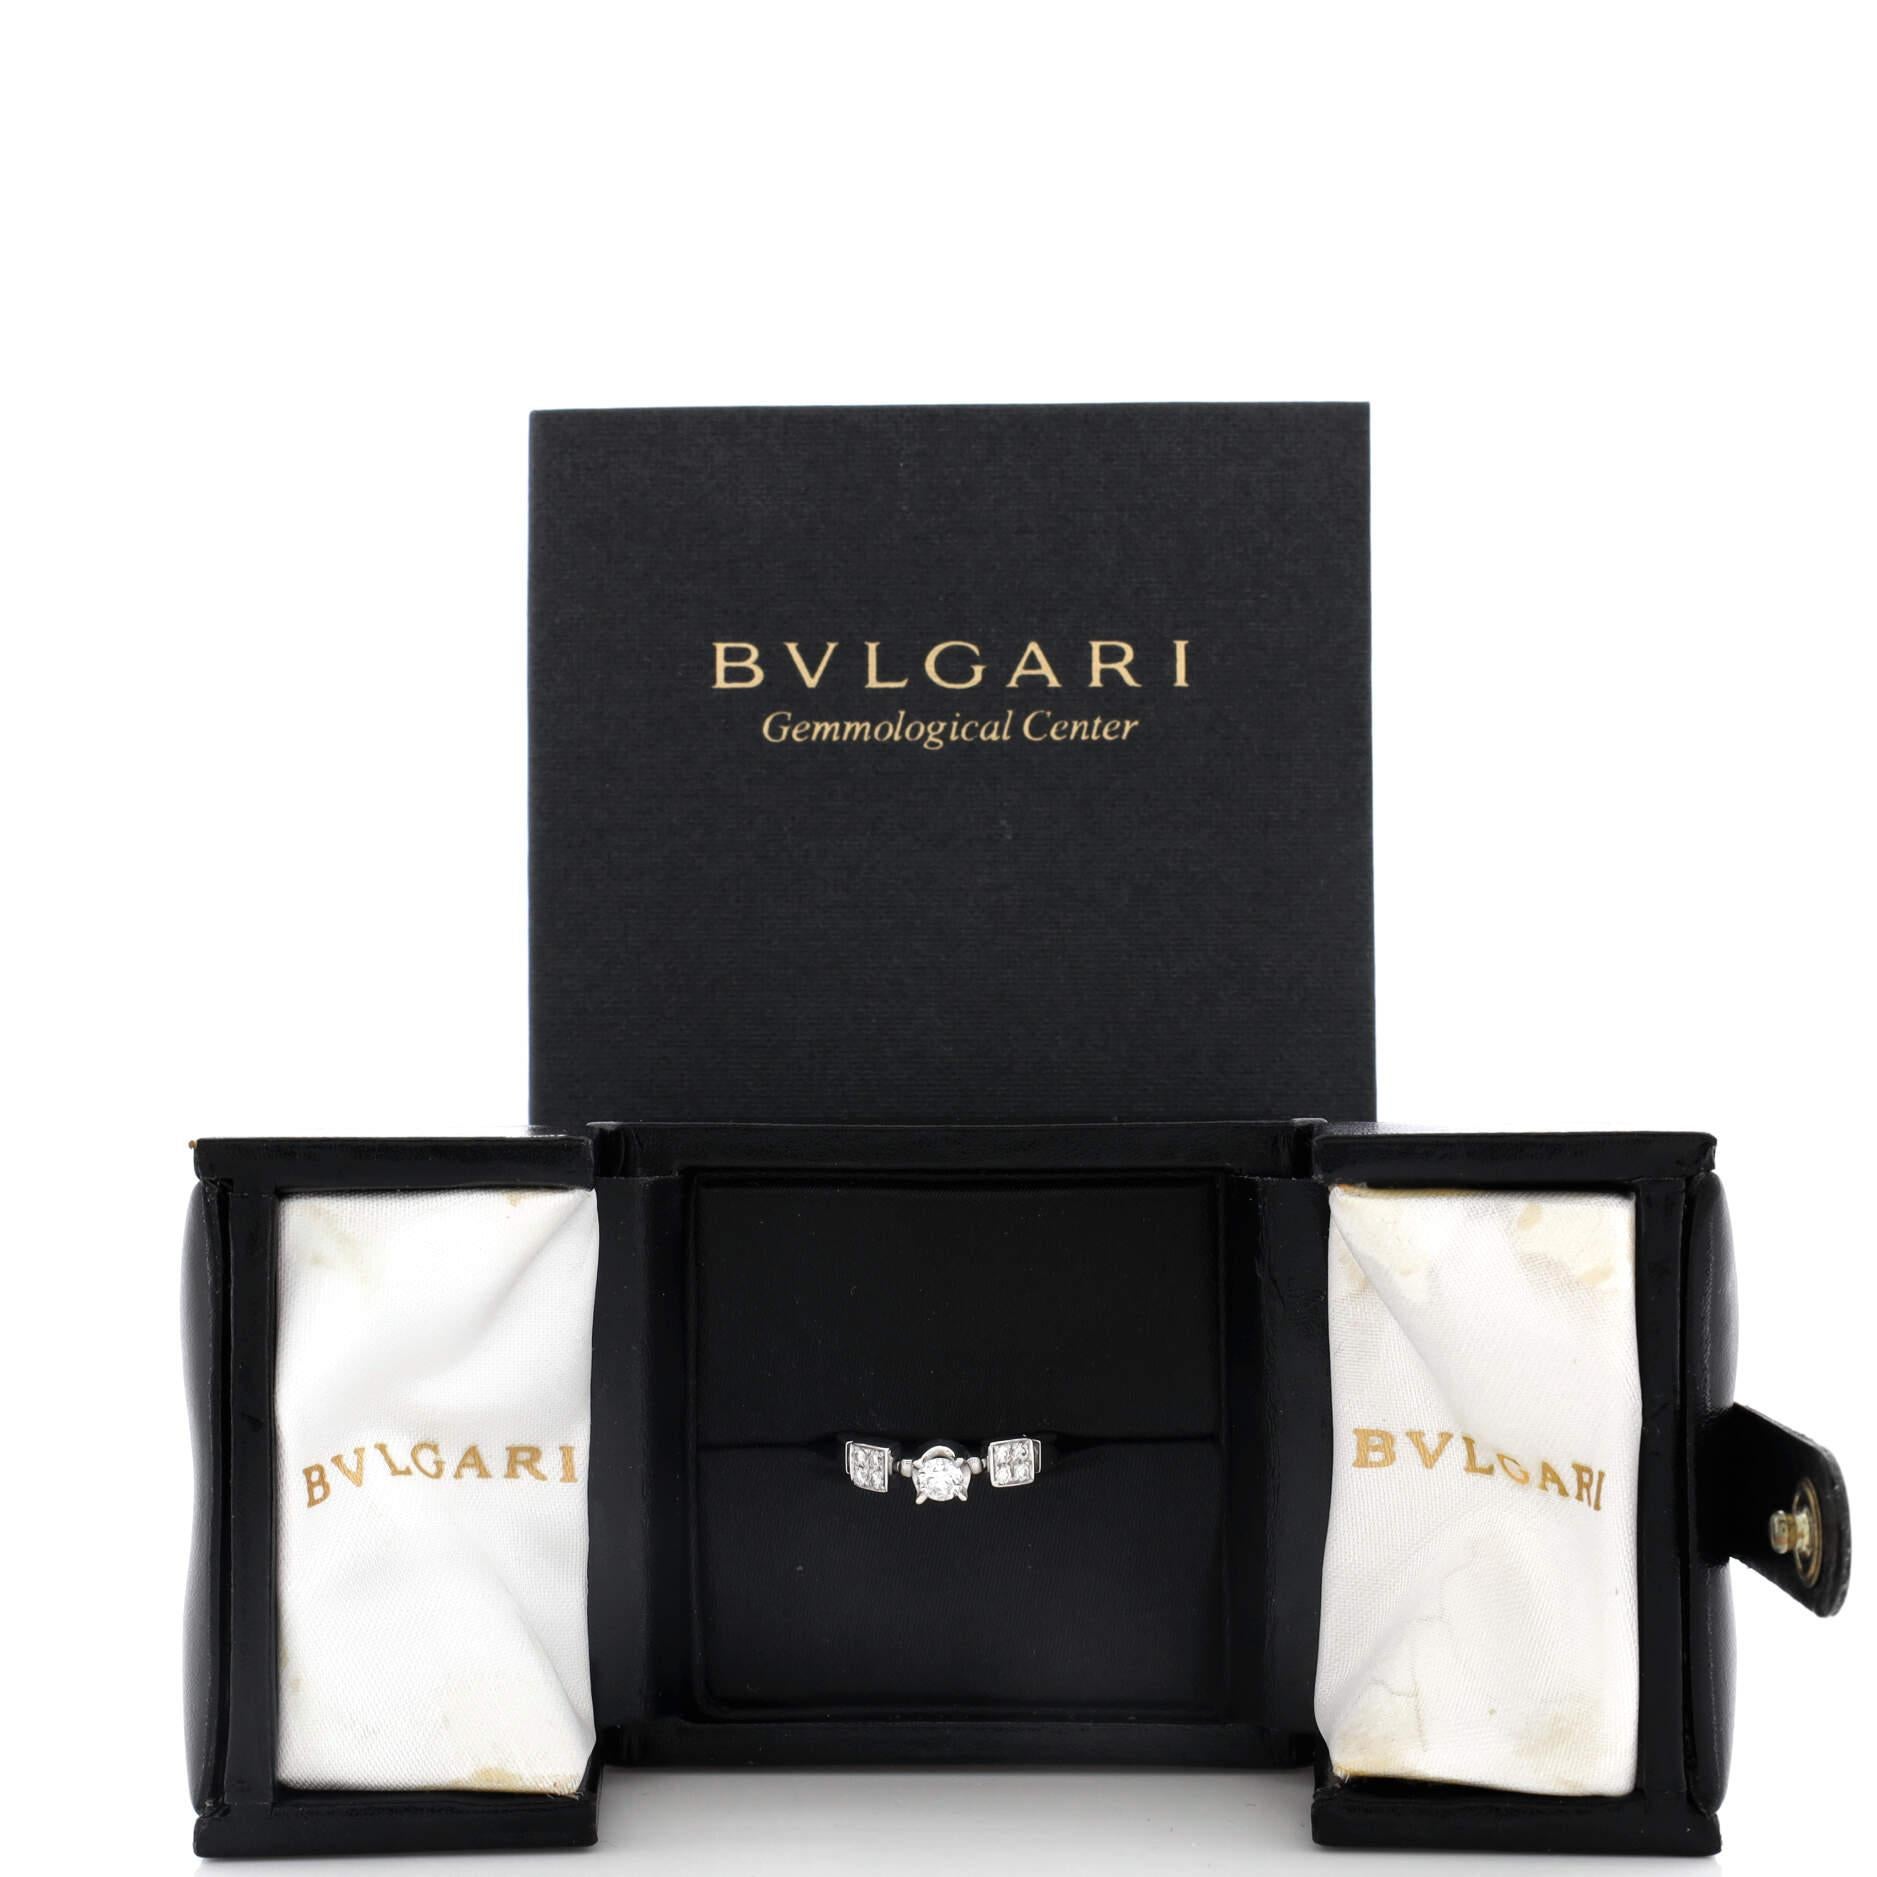 Condition: Great. Minor wear throughout.
Accessories: No Accessories
Measurements: Size: 6.5, Width: 2.30 mm
Designer: Bvlgari
Model: Lucia One Row Ring 18K White Gold with Diamonds
Exterior Color: White Gold
Item Number: 203219/21